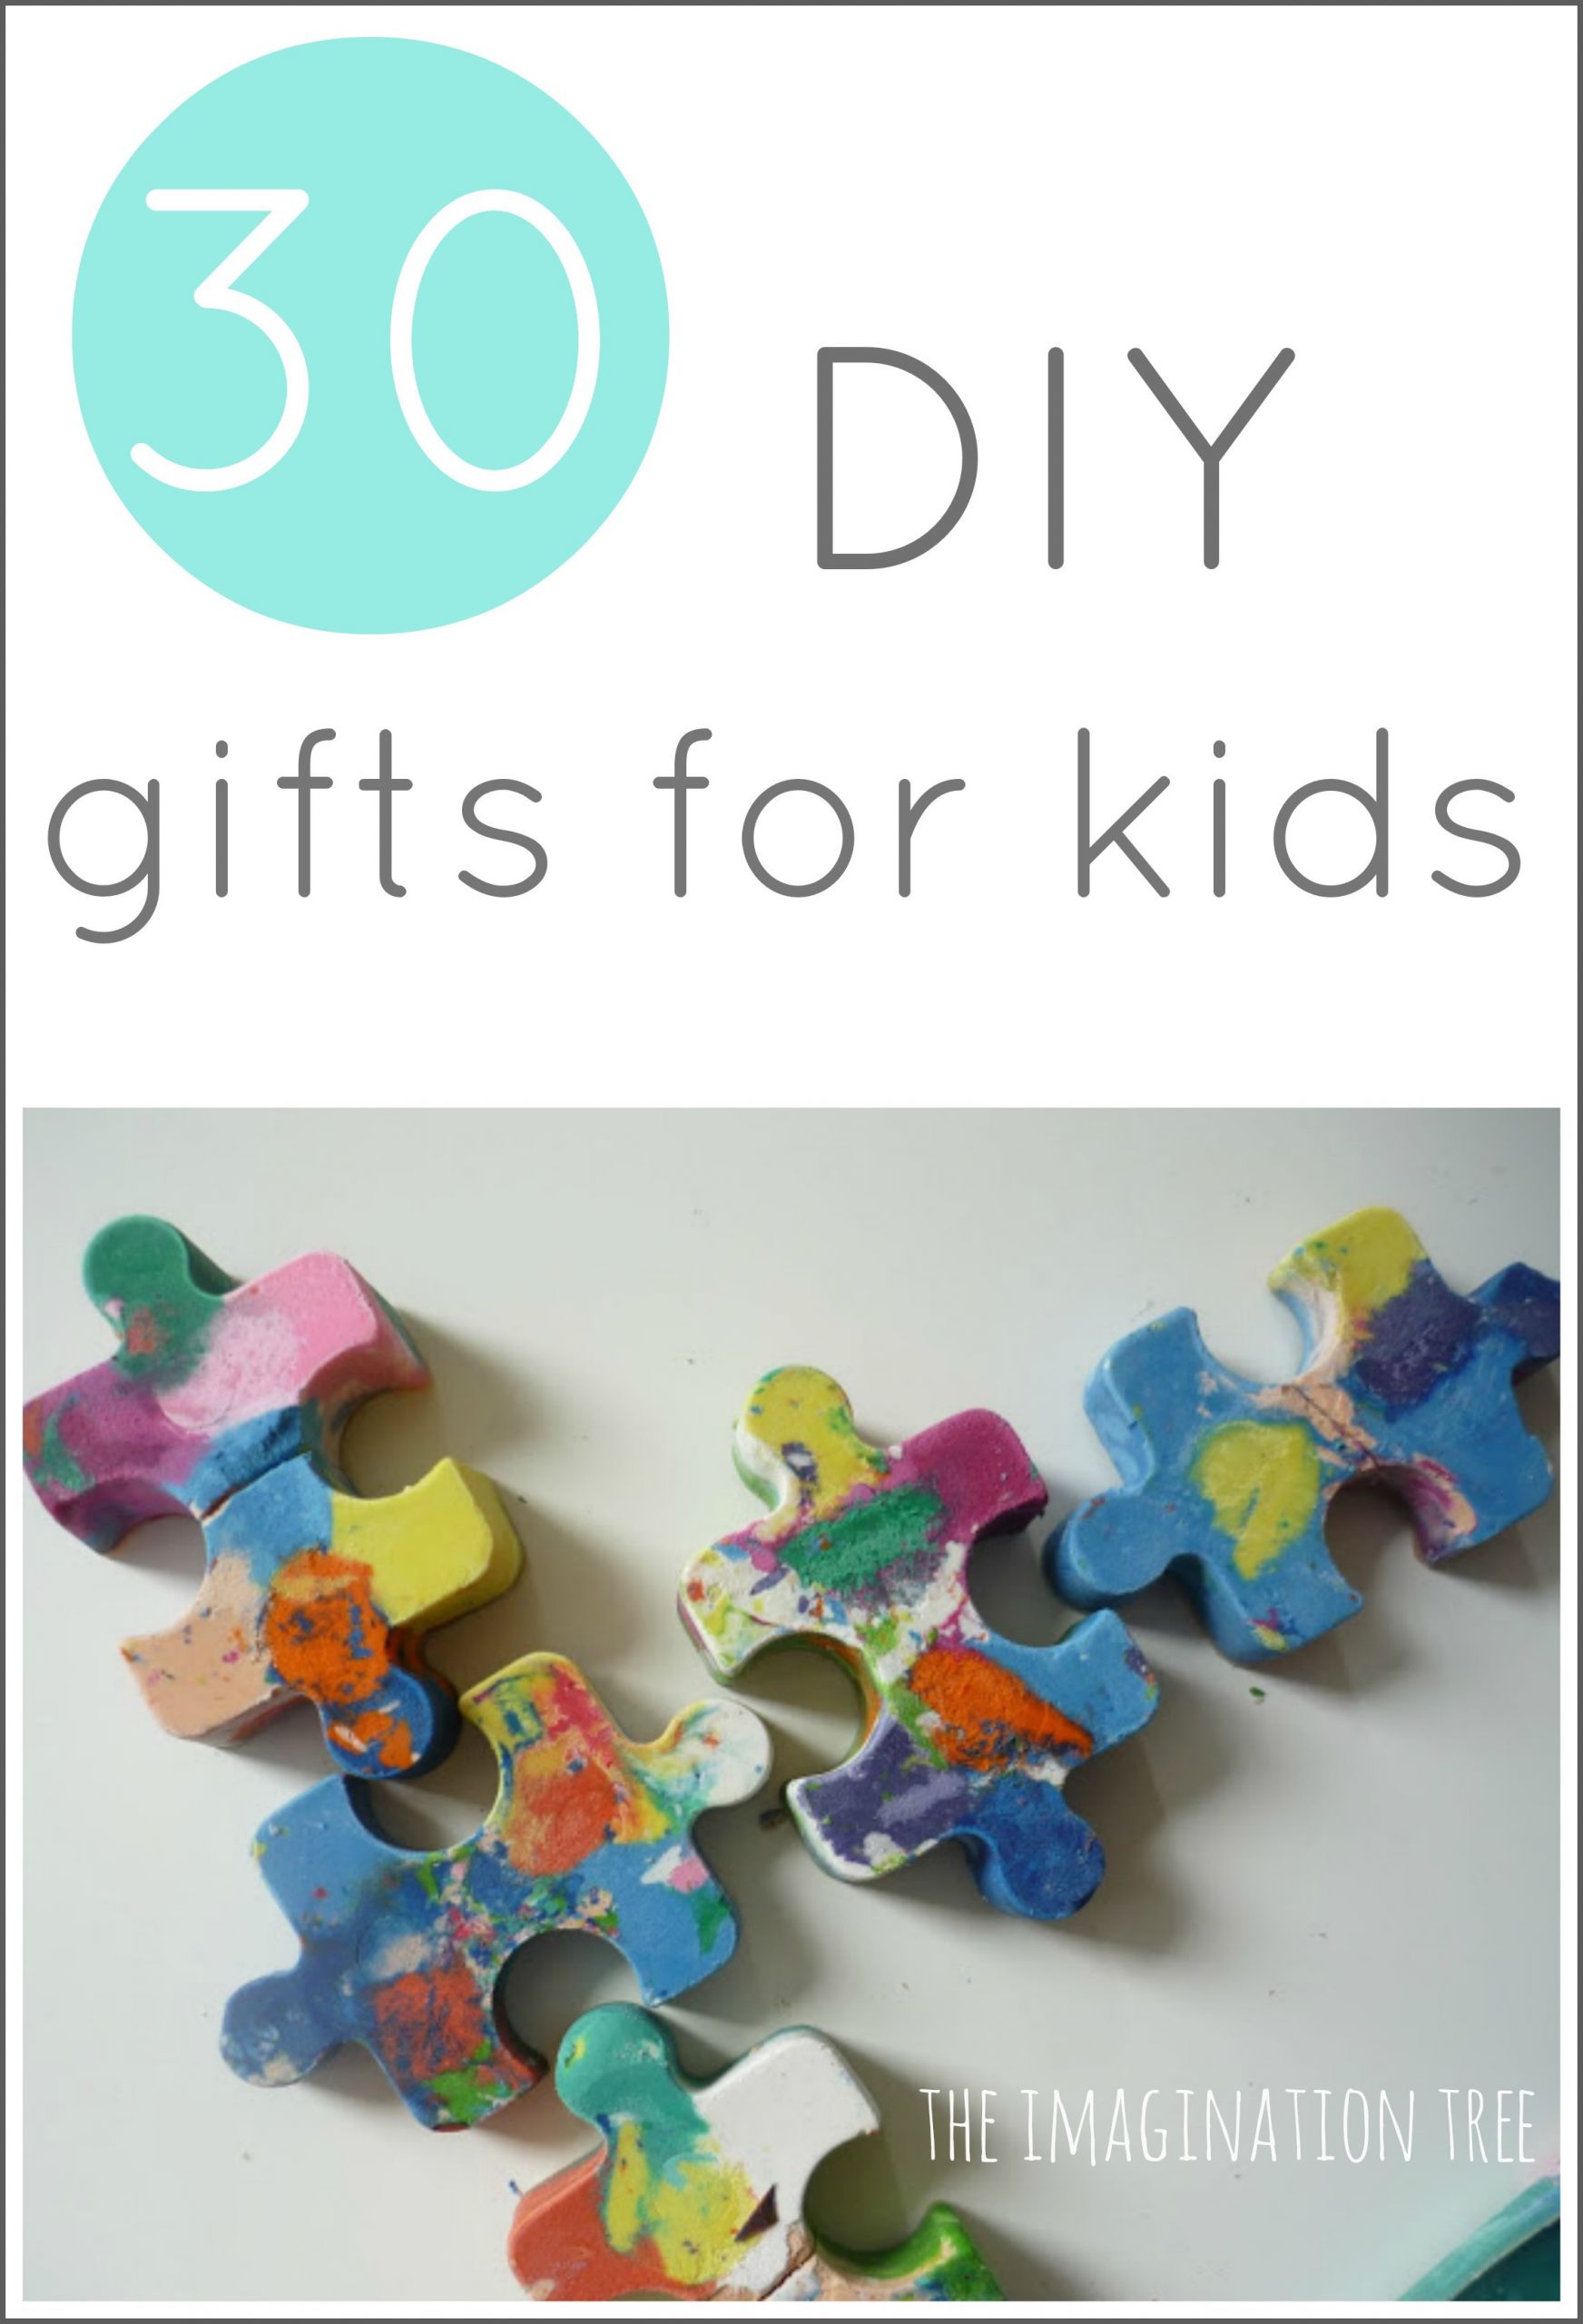 DIY Presents For Kids
 30 DIY Gifts to Make for Kids The Imagination Tree